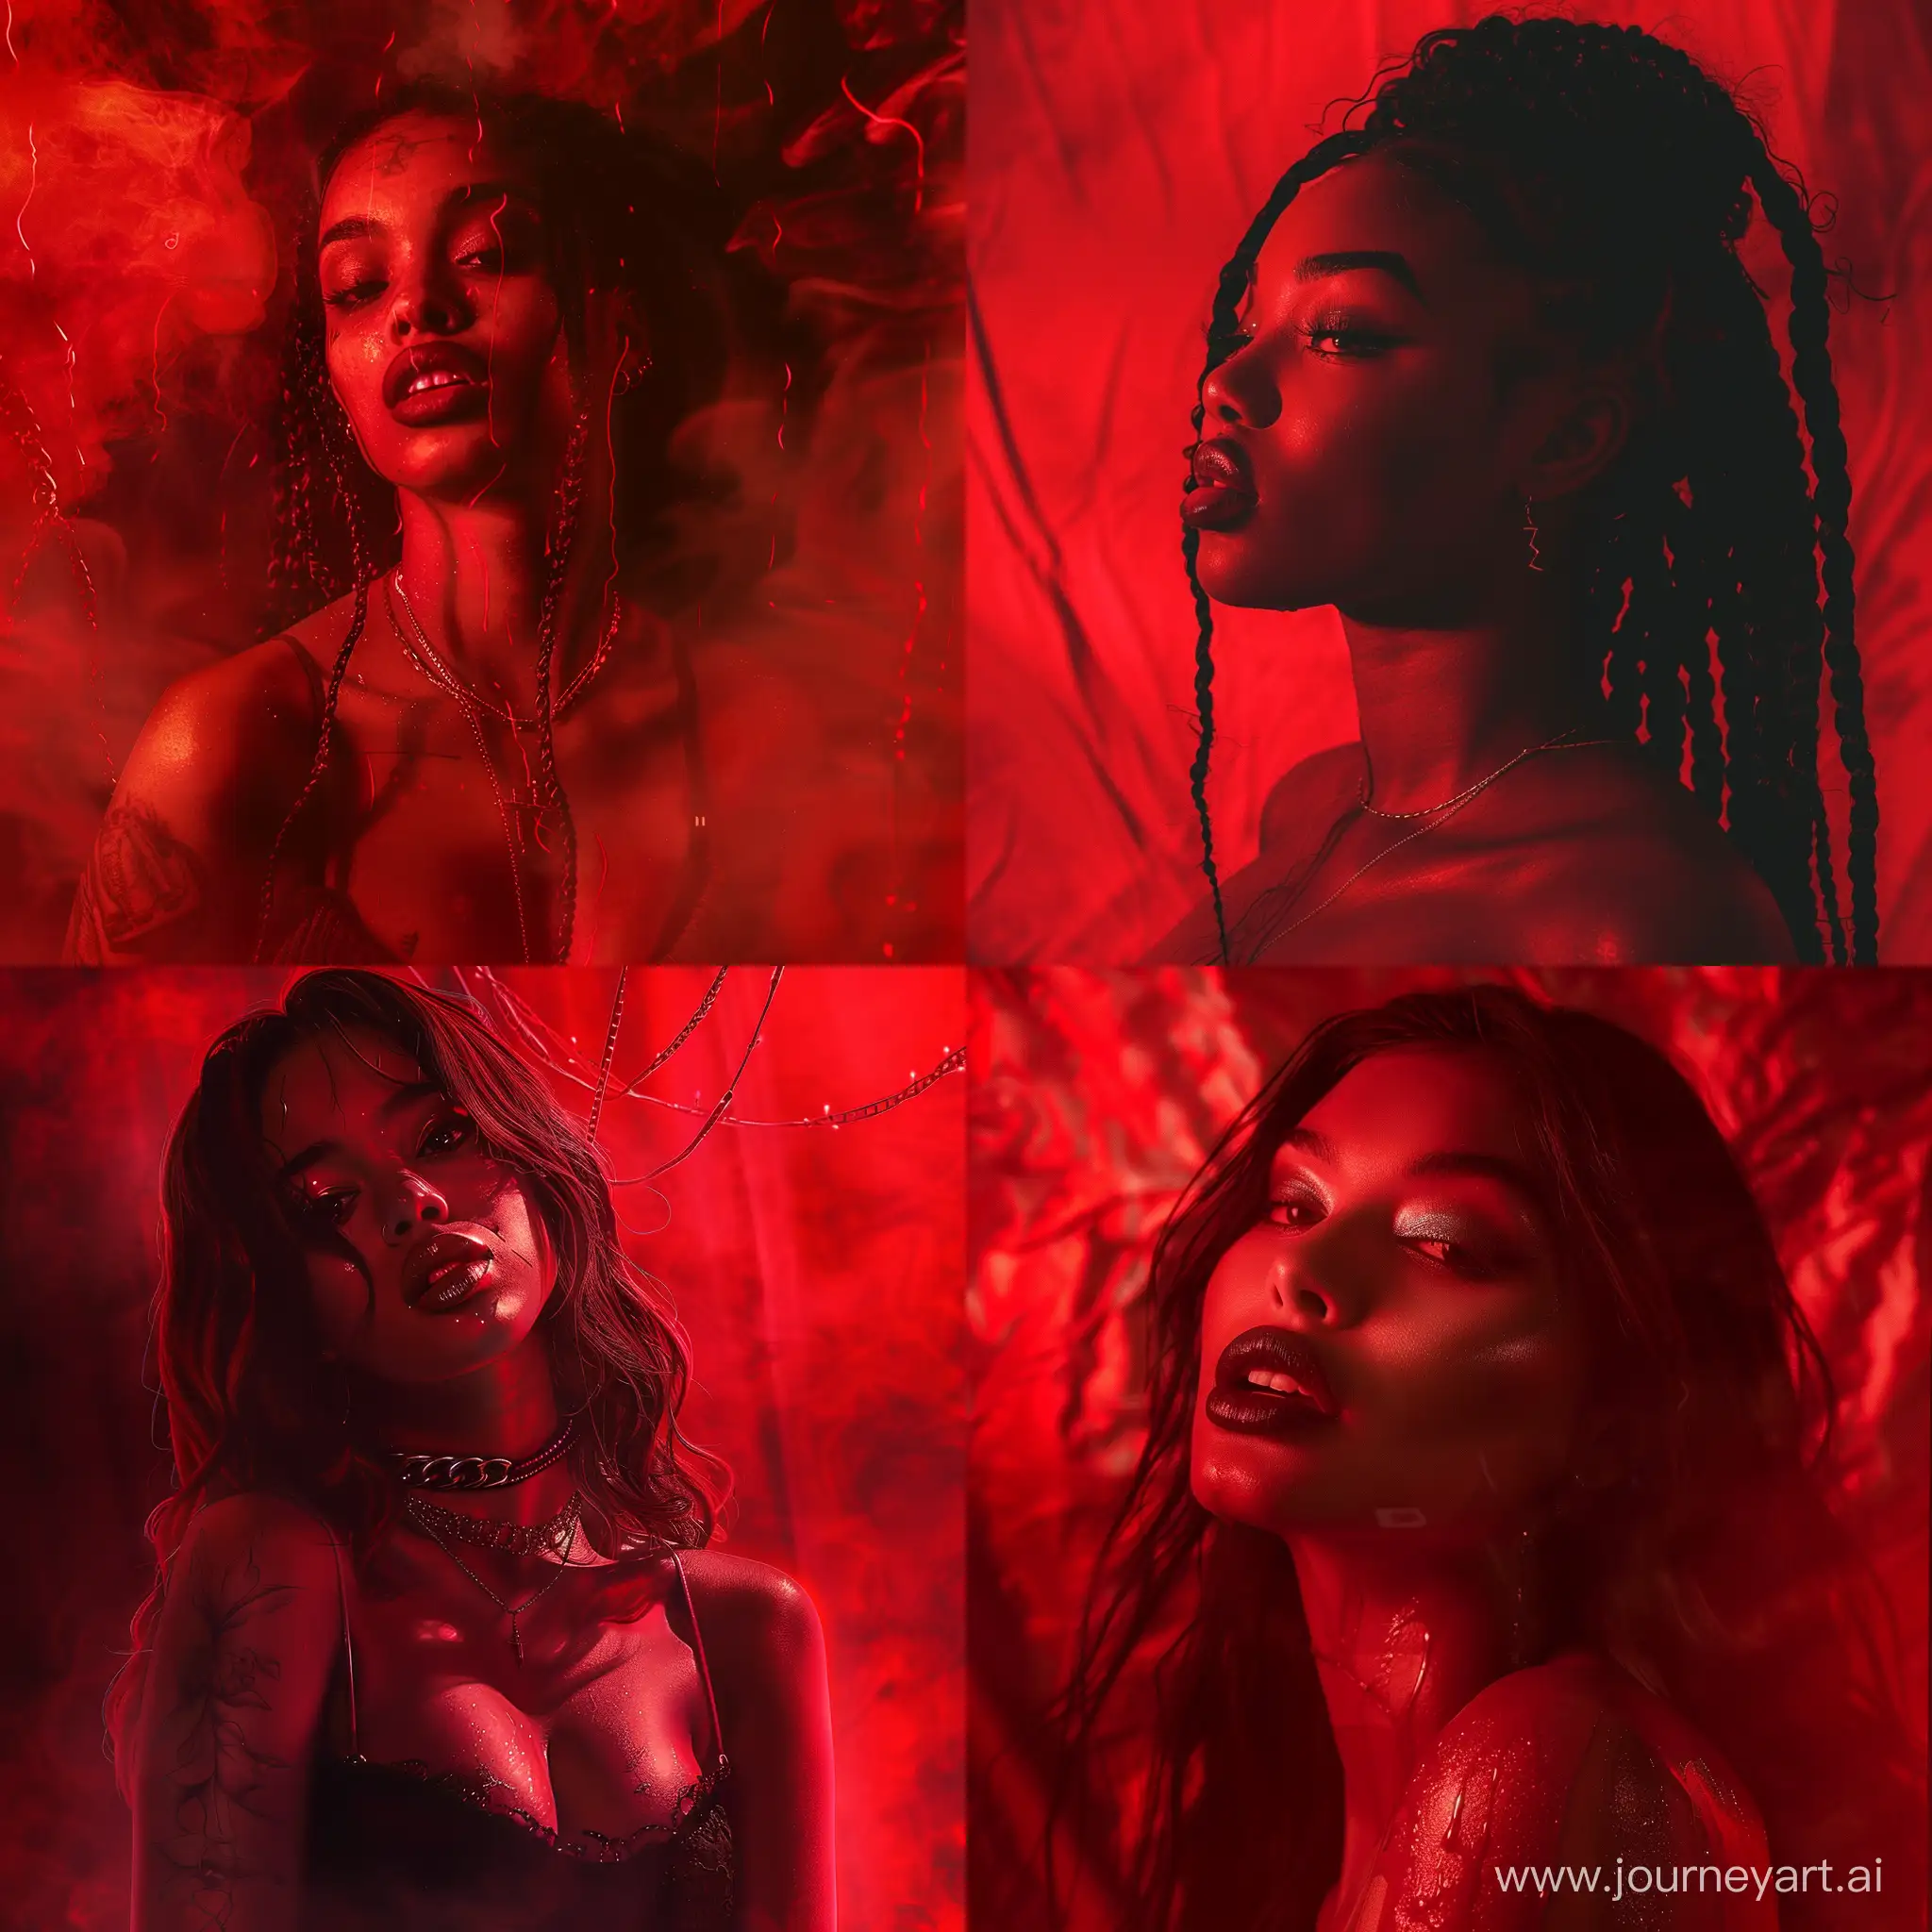 Sultry-and-Mysterious-Portrait-in-Red-RnB-Ambiance